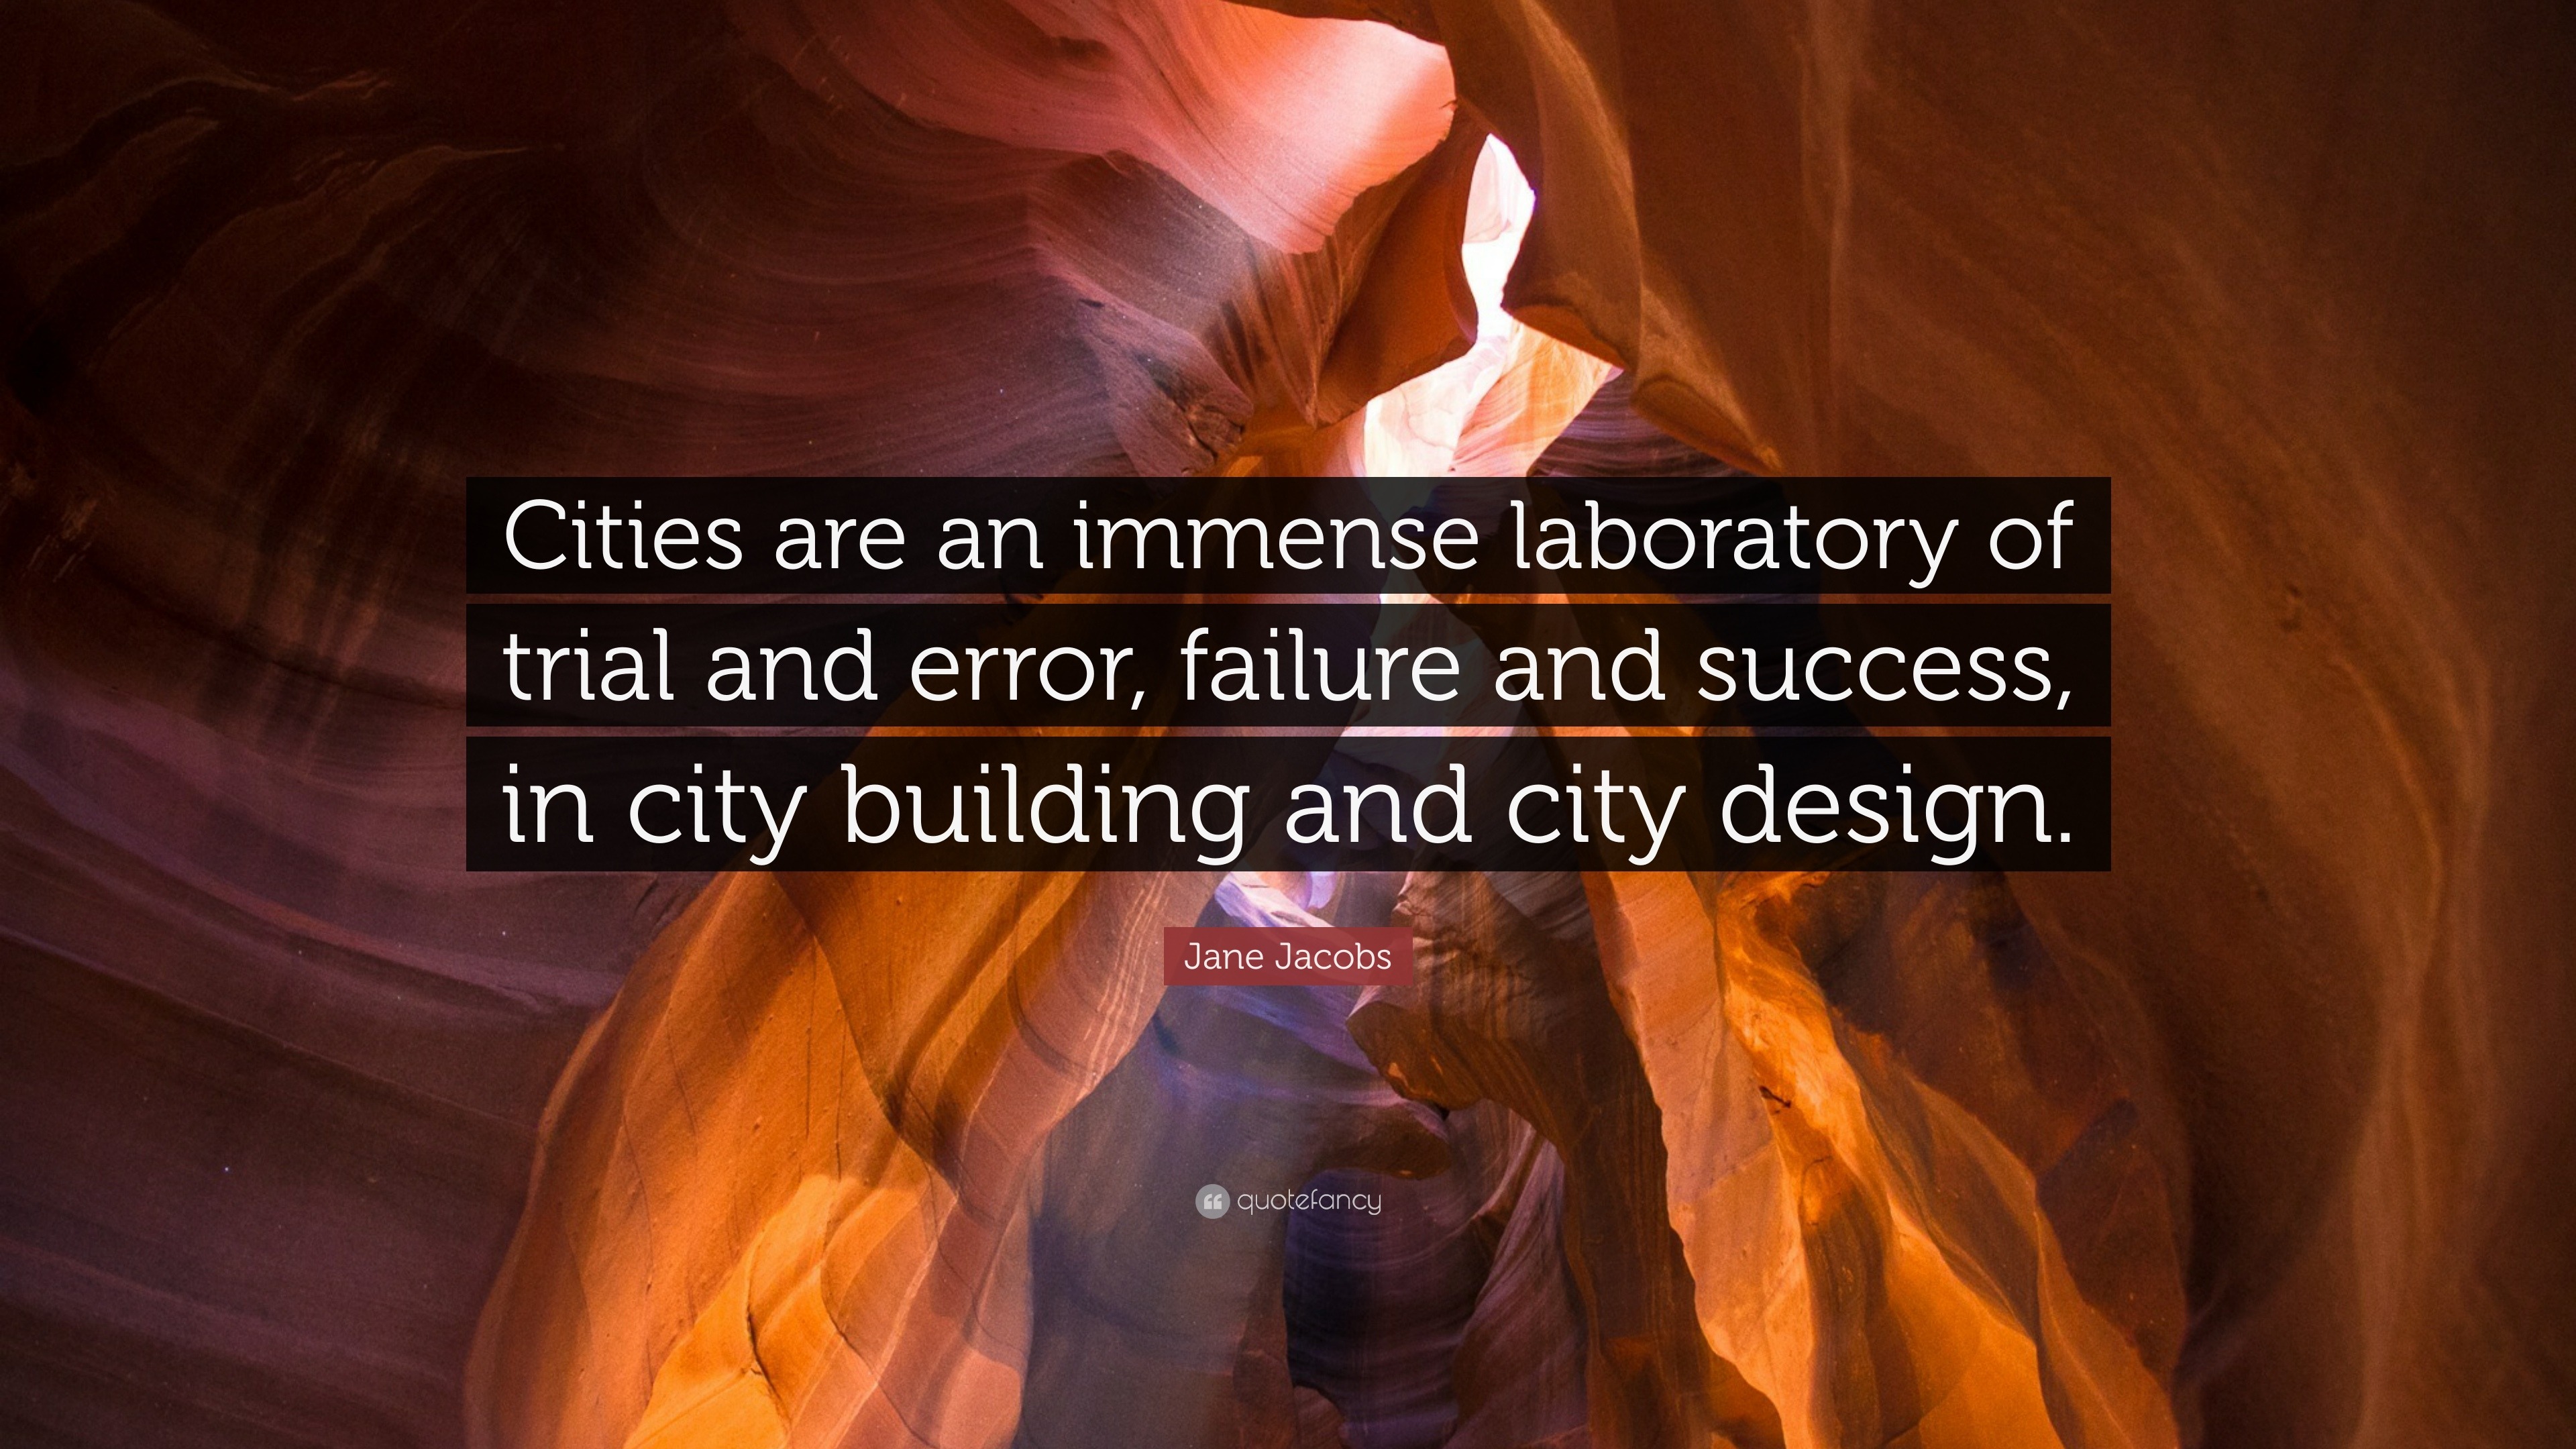 Jane Jacobs Quote: “Cities are an immense laboratory of trial and error